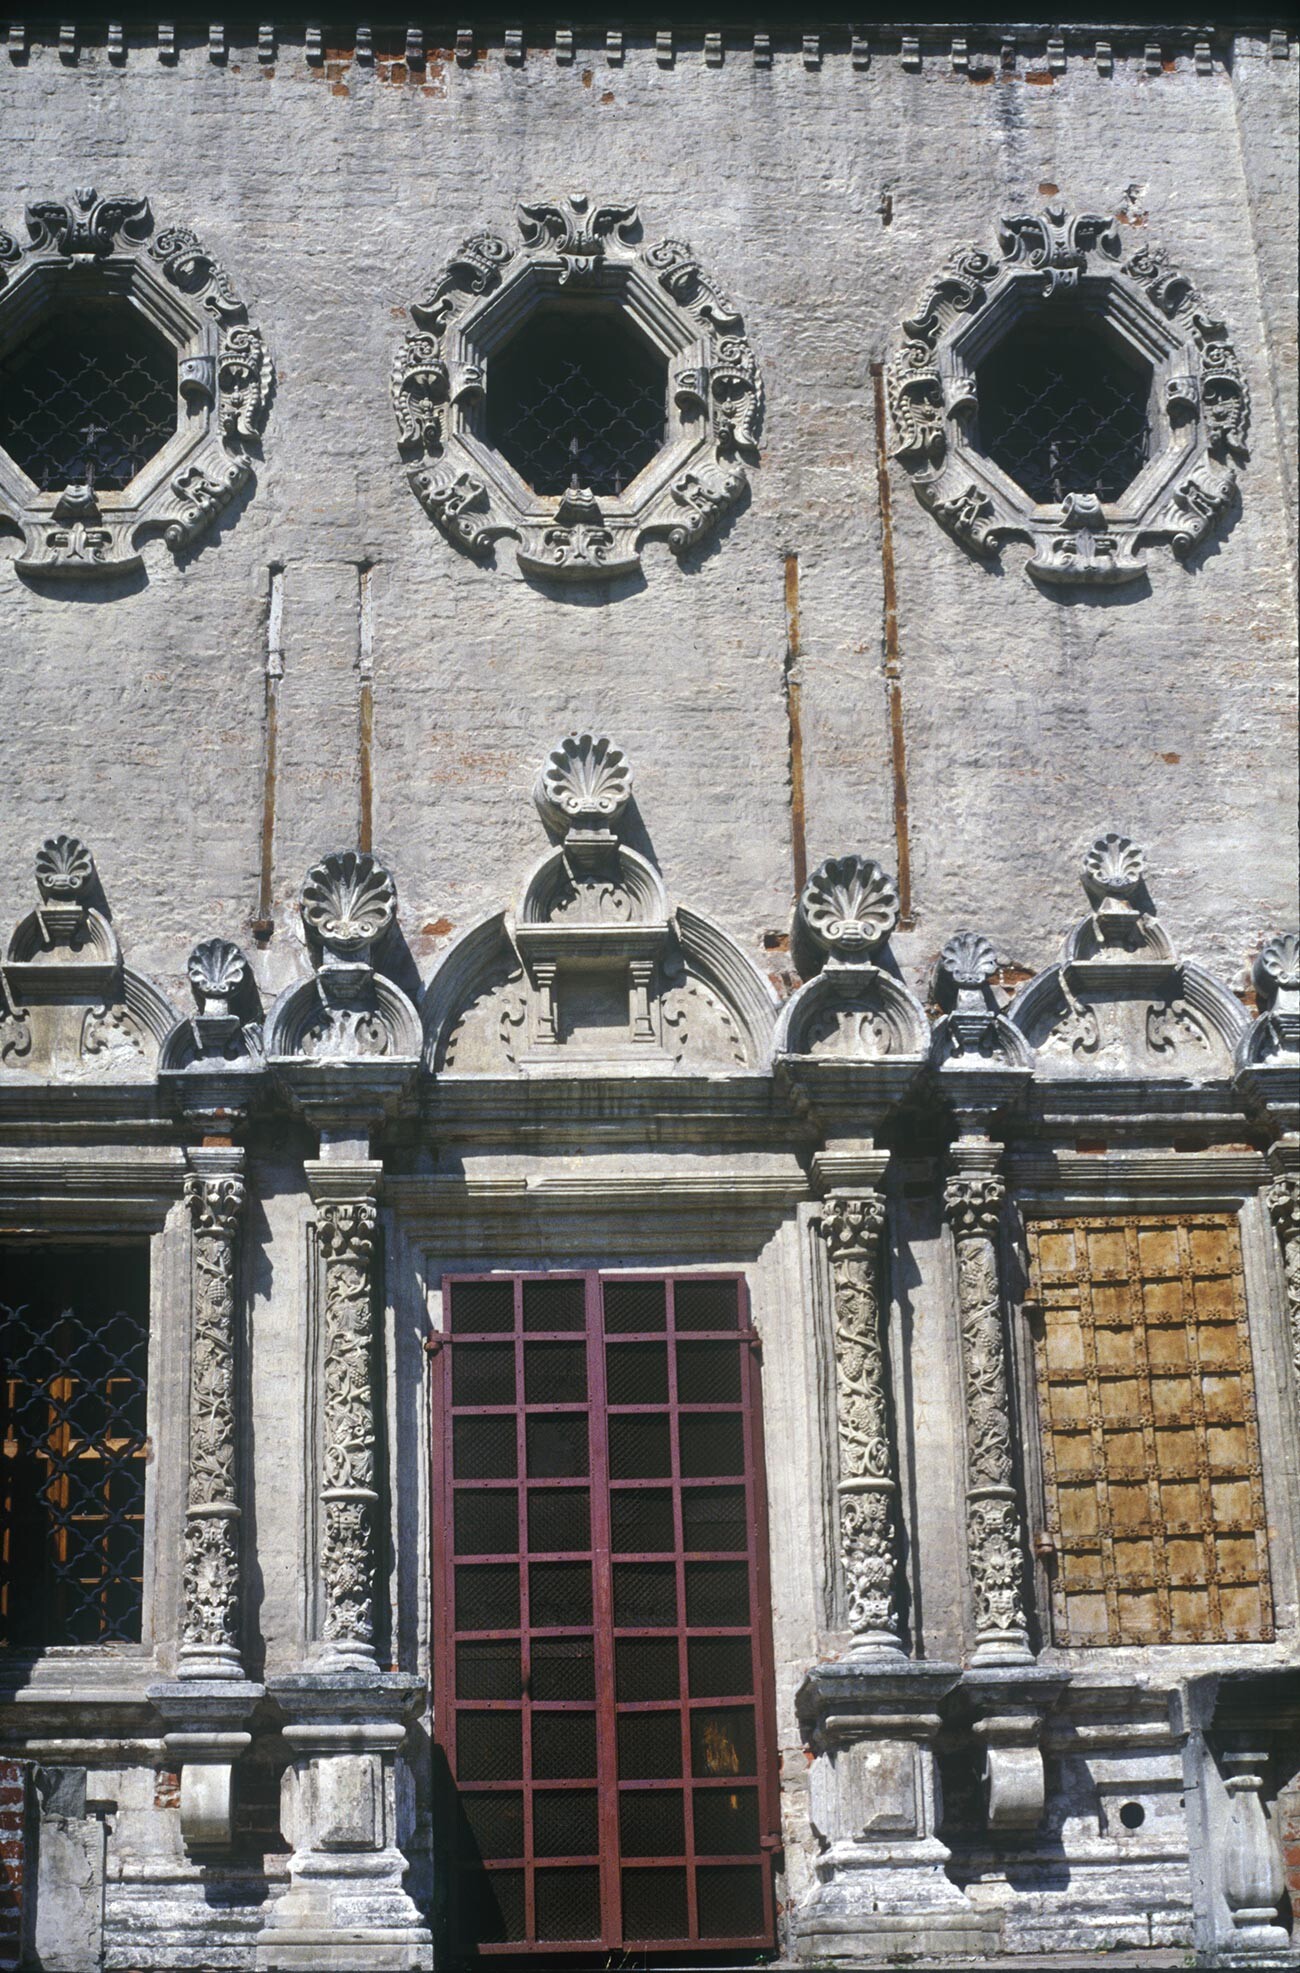 Troitse-Lykovo. Church of the Trinity. South facade with carved limestone ornamentation over portal. July 21, 1996.